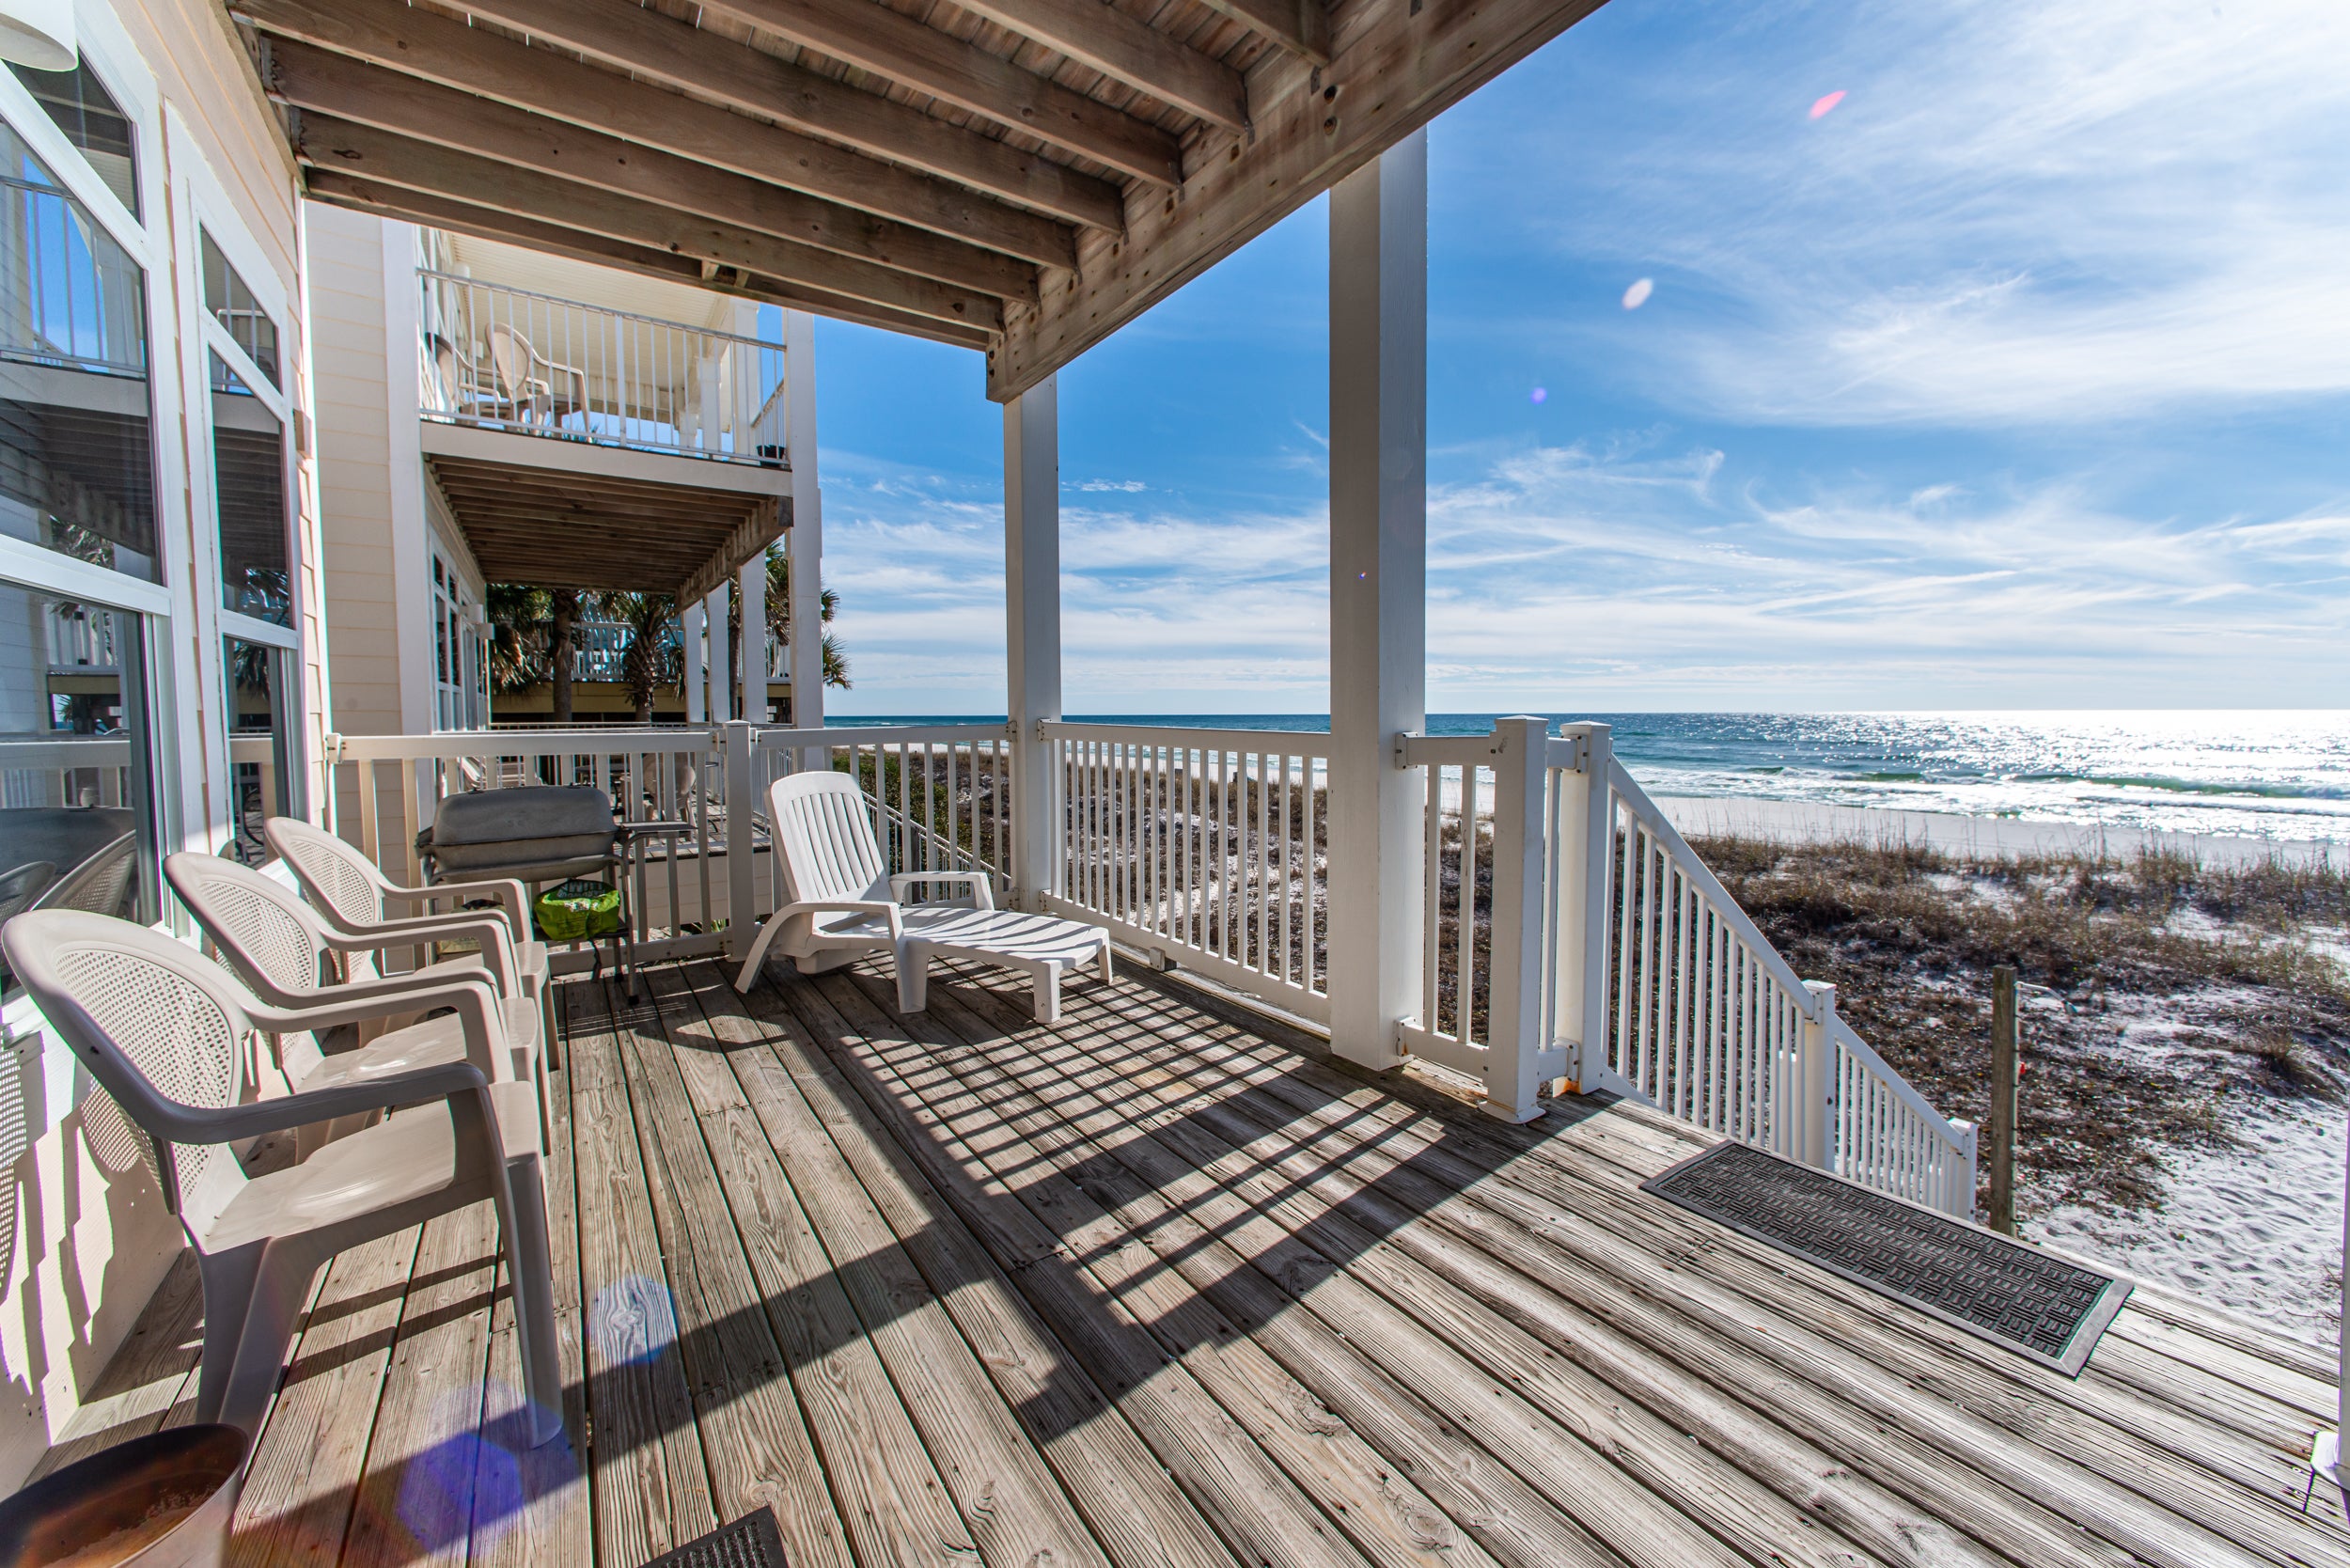 Covered Deck leads you straight to the beach!